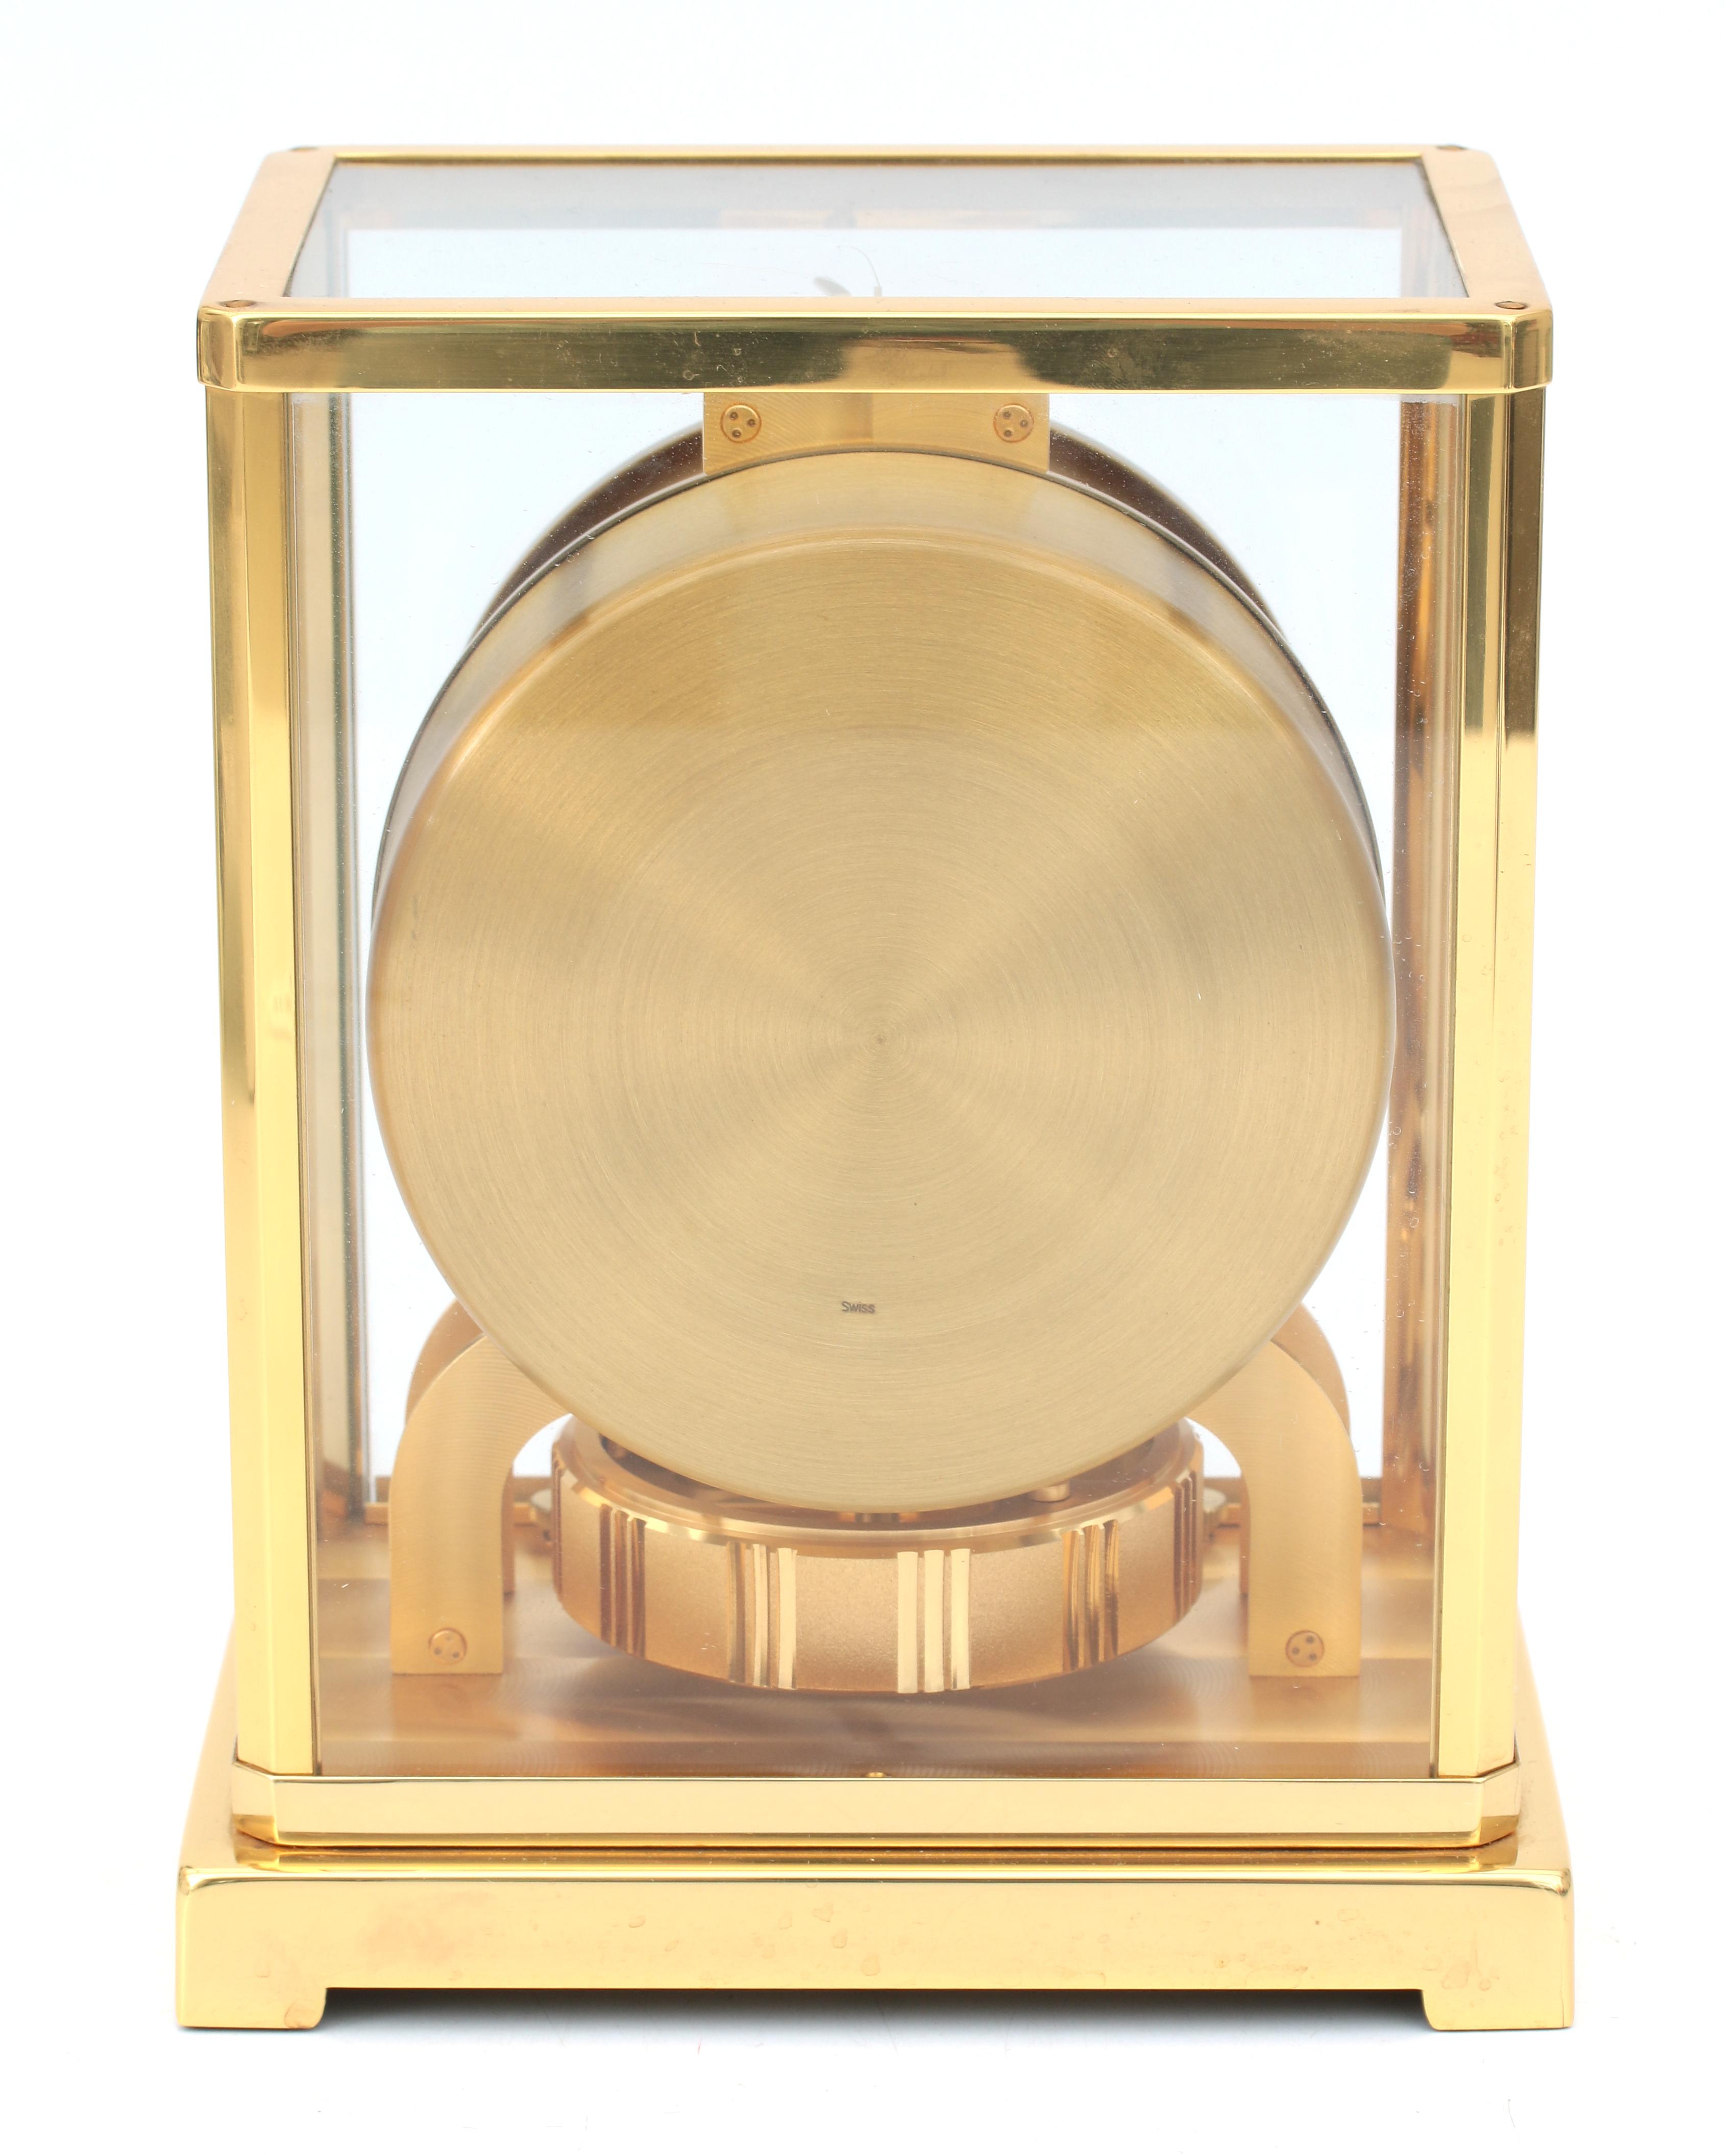 A perpetuum moving clock in gold-plated metal and glass case, Jaeger leCoultre, Swizerland, circa 19 - Image 5 of 5